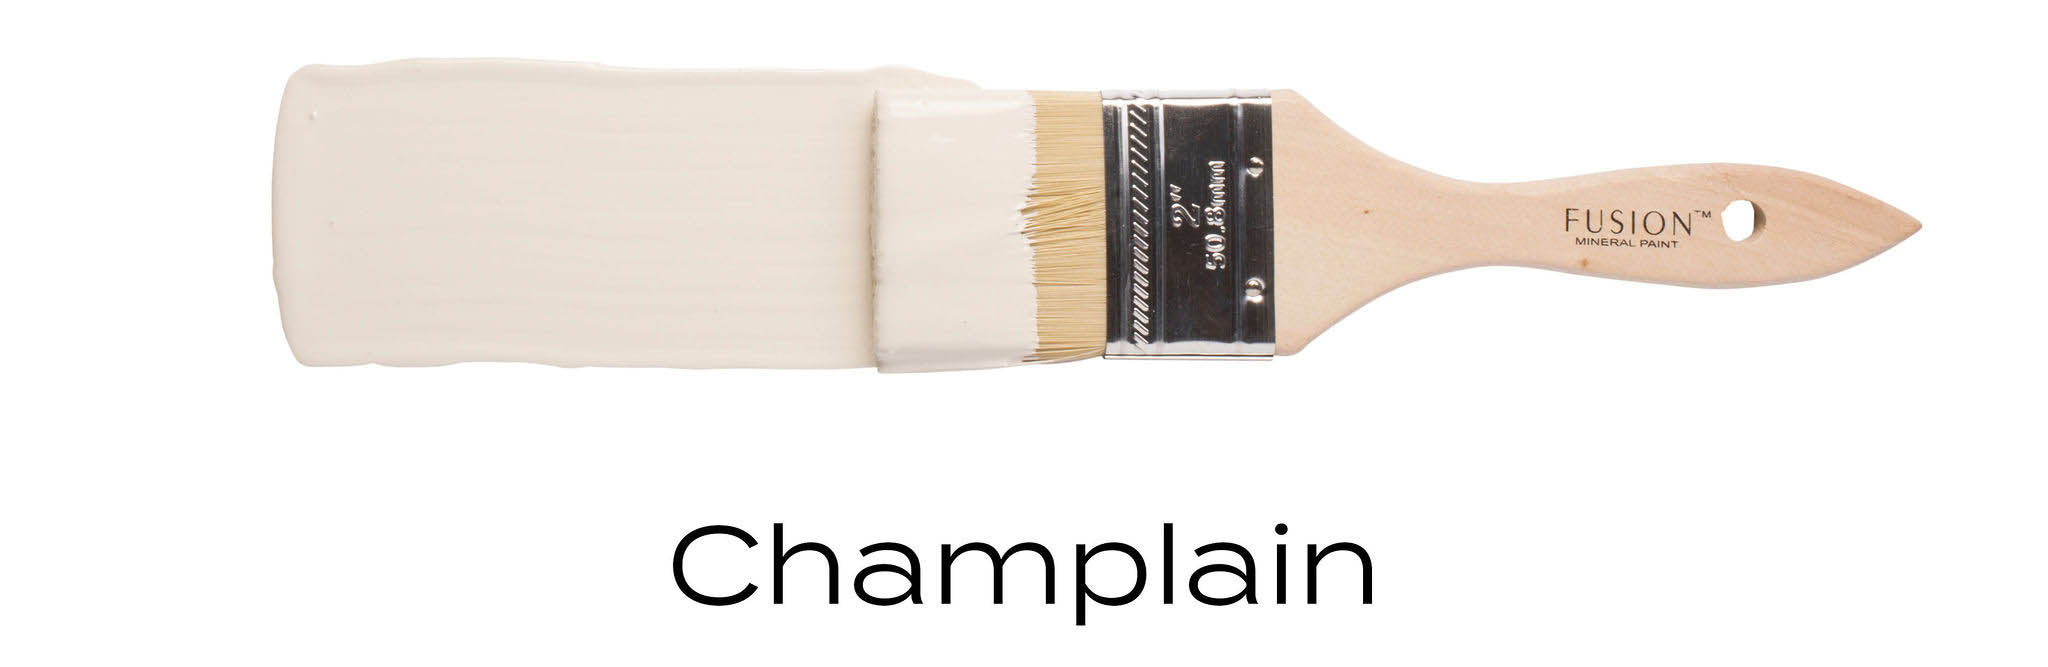 Champlain Fusion Mineral Paint Furniture Paint Colour Example, No Prep or top coat needed, UK Stockist